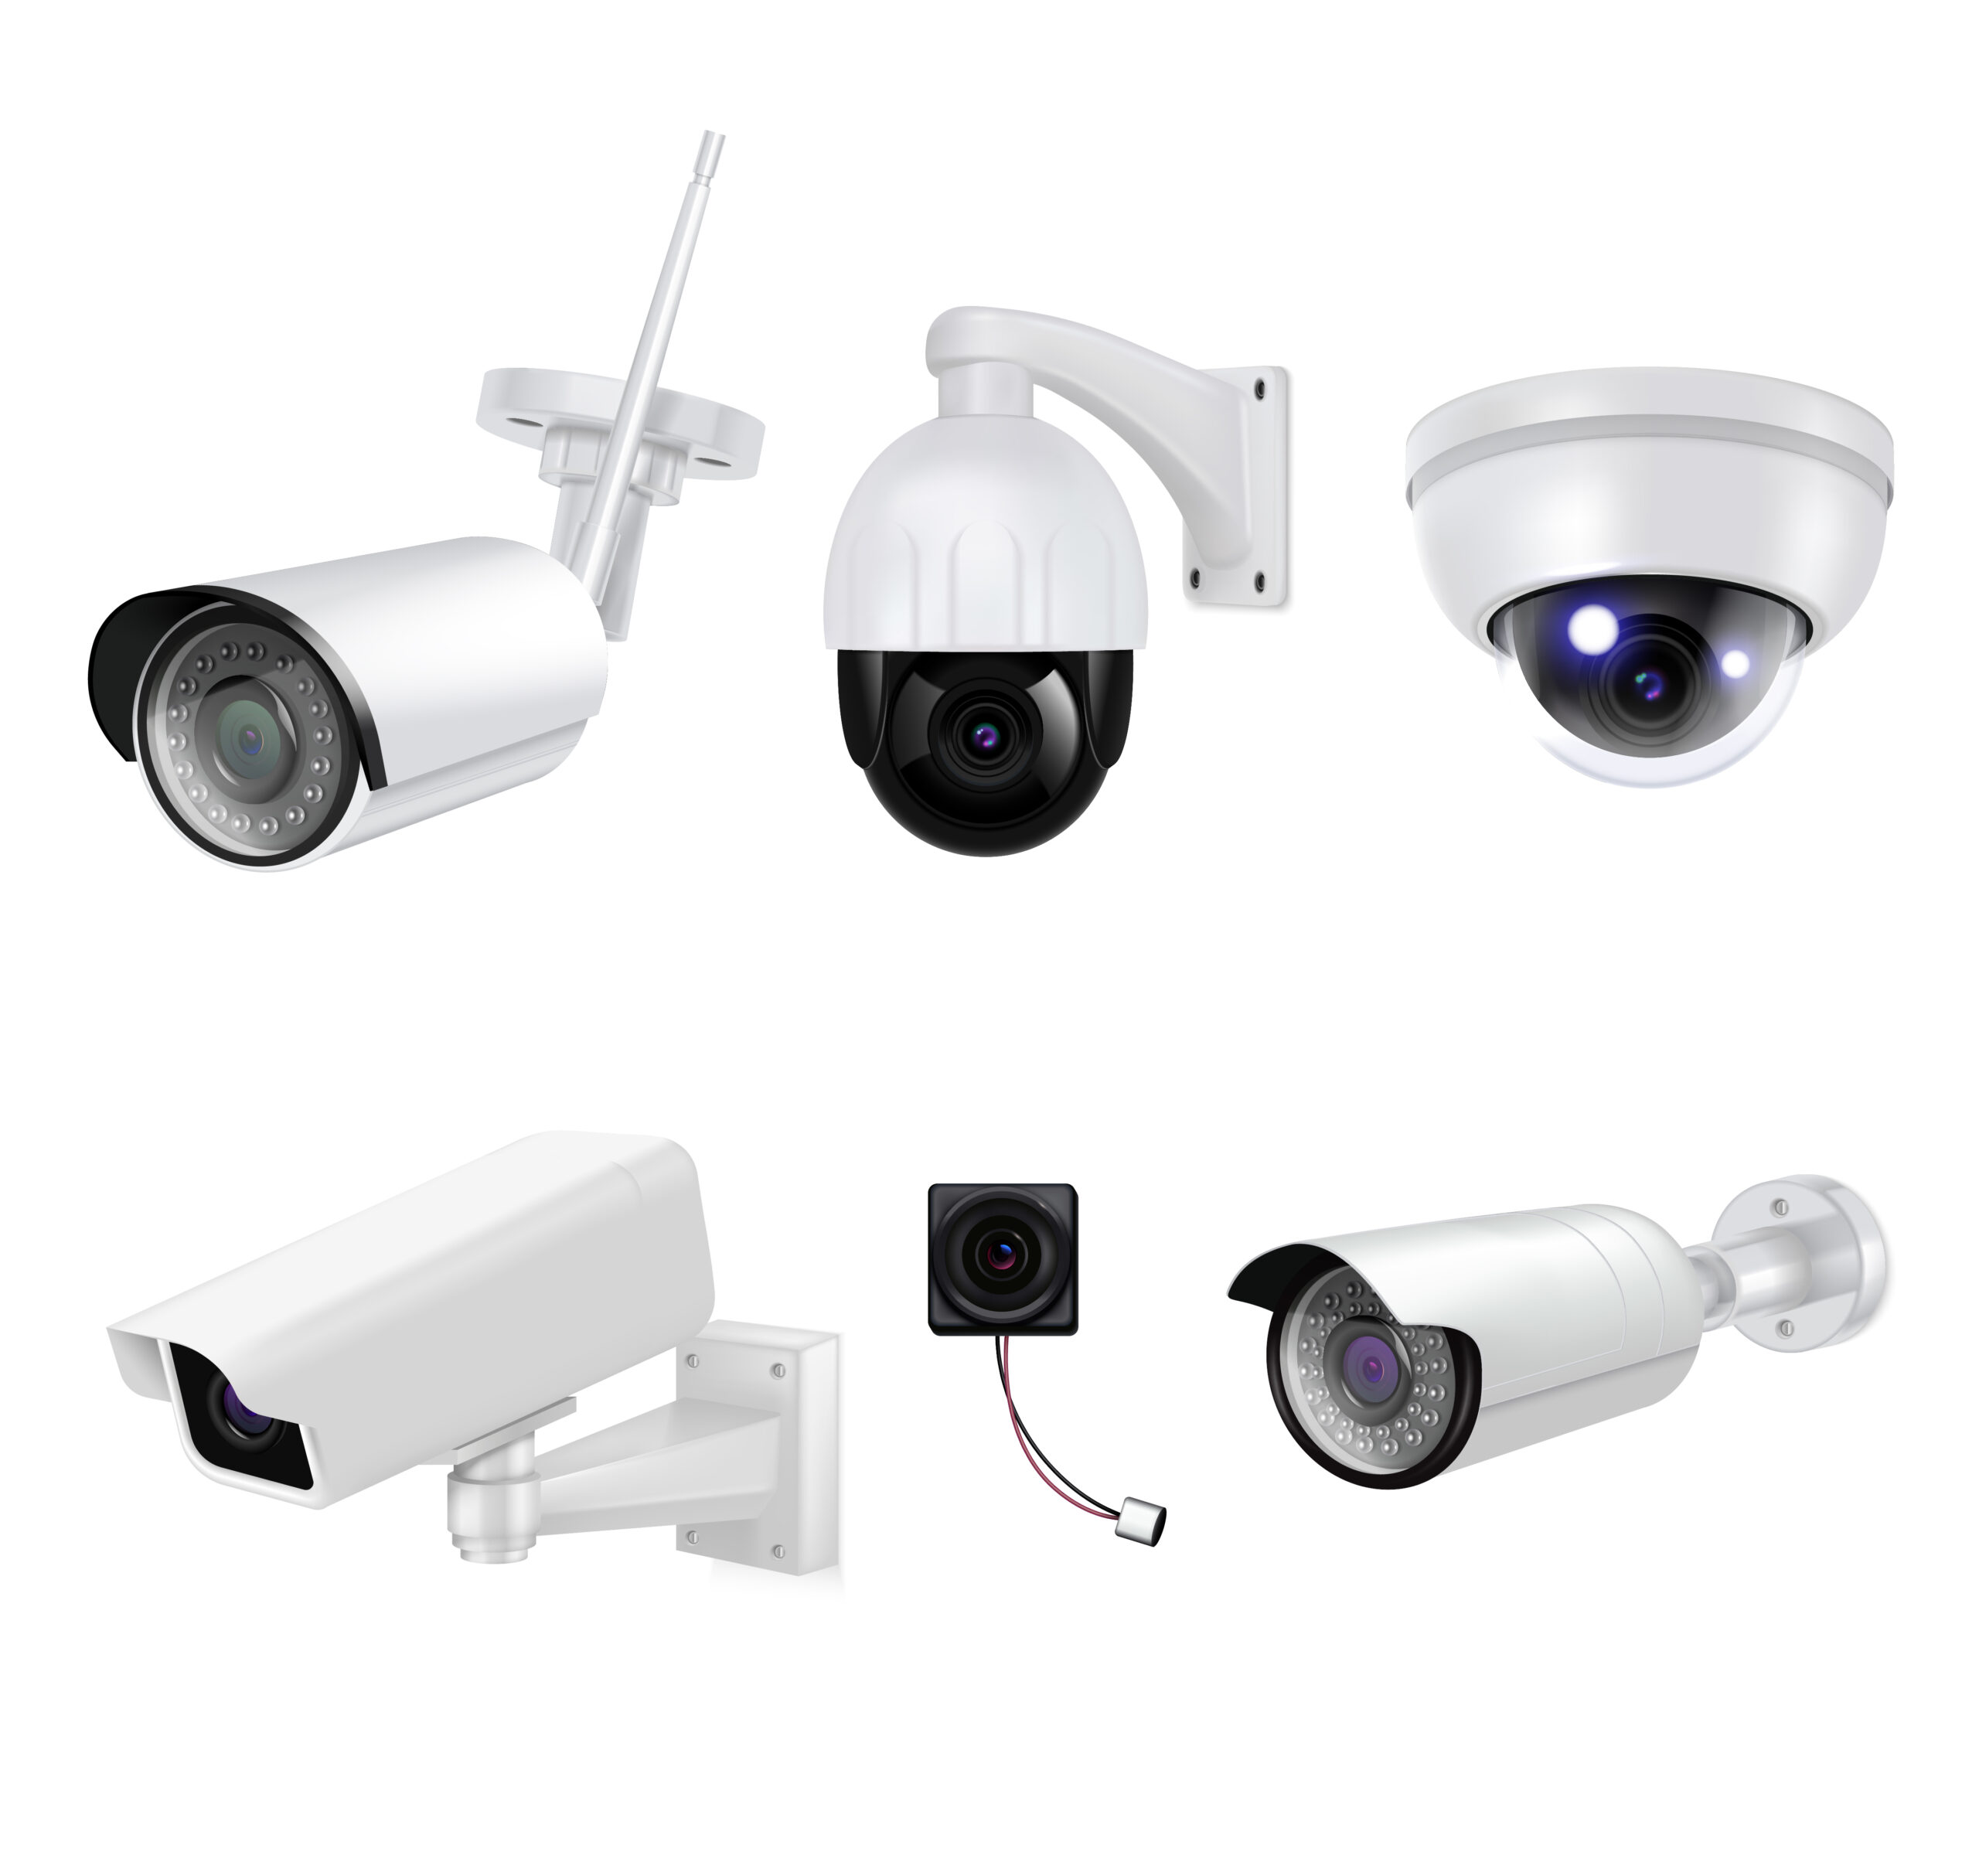 Remote Monitoring With IP Camera Systems: Keeping An Eye On Your Property